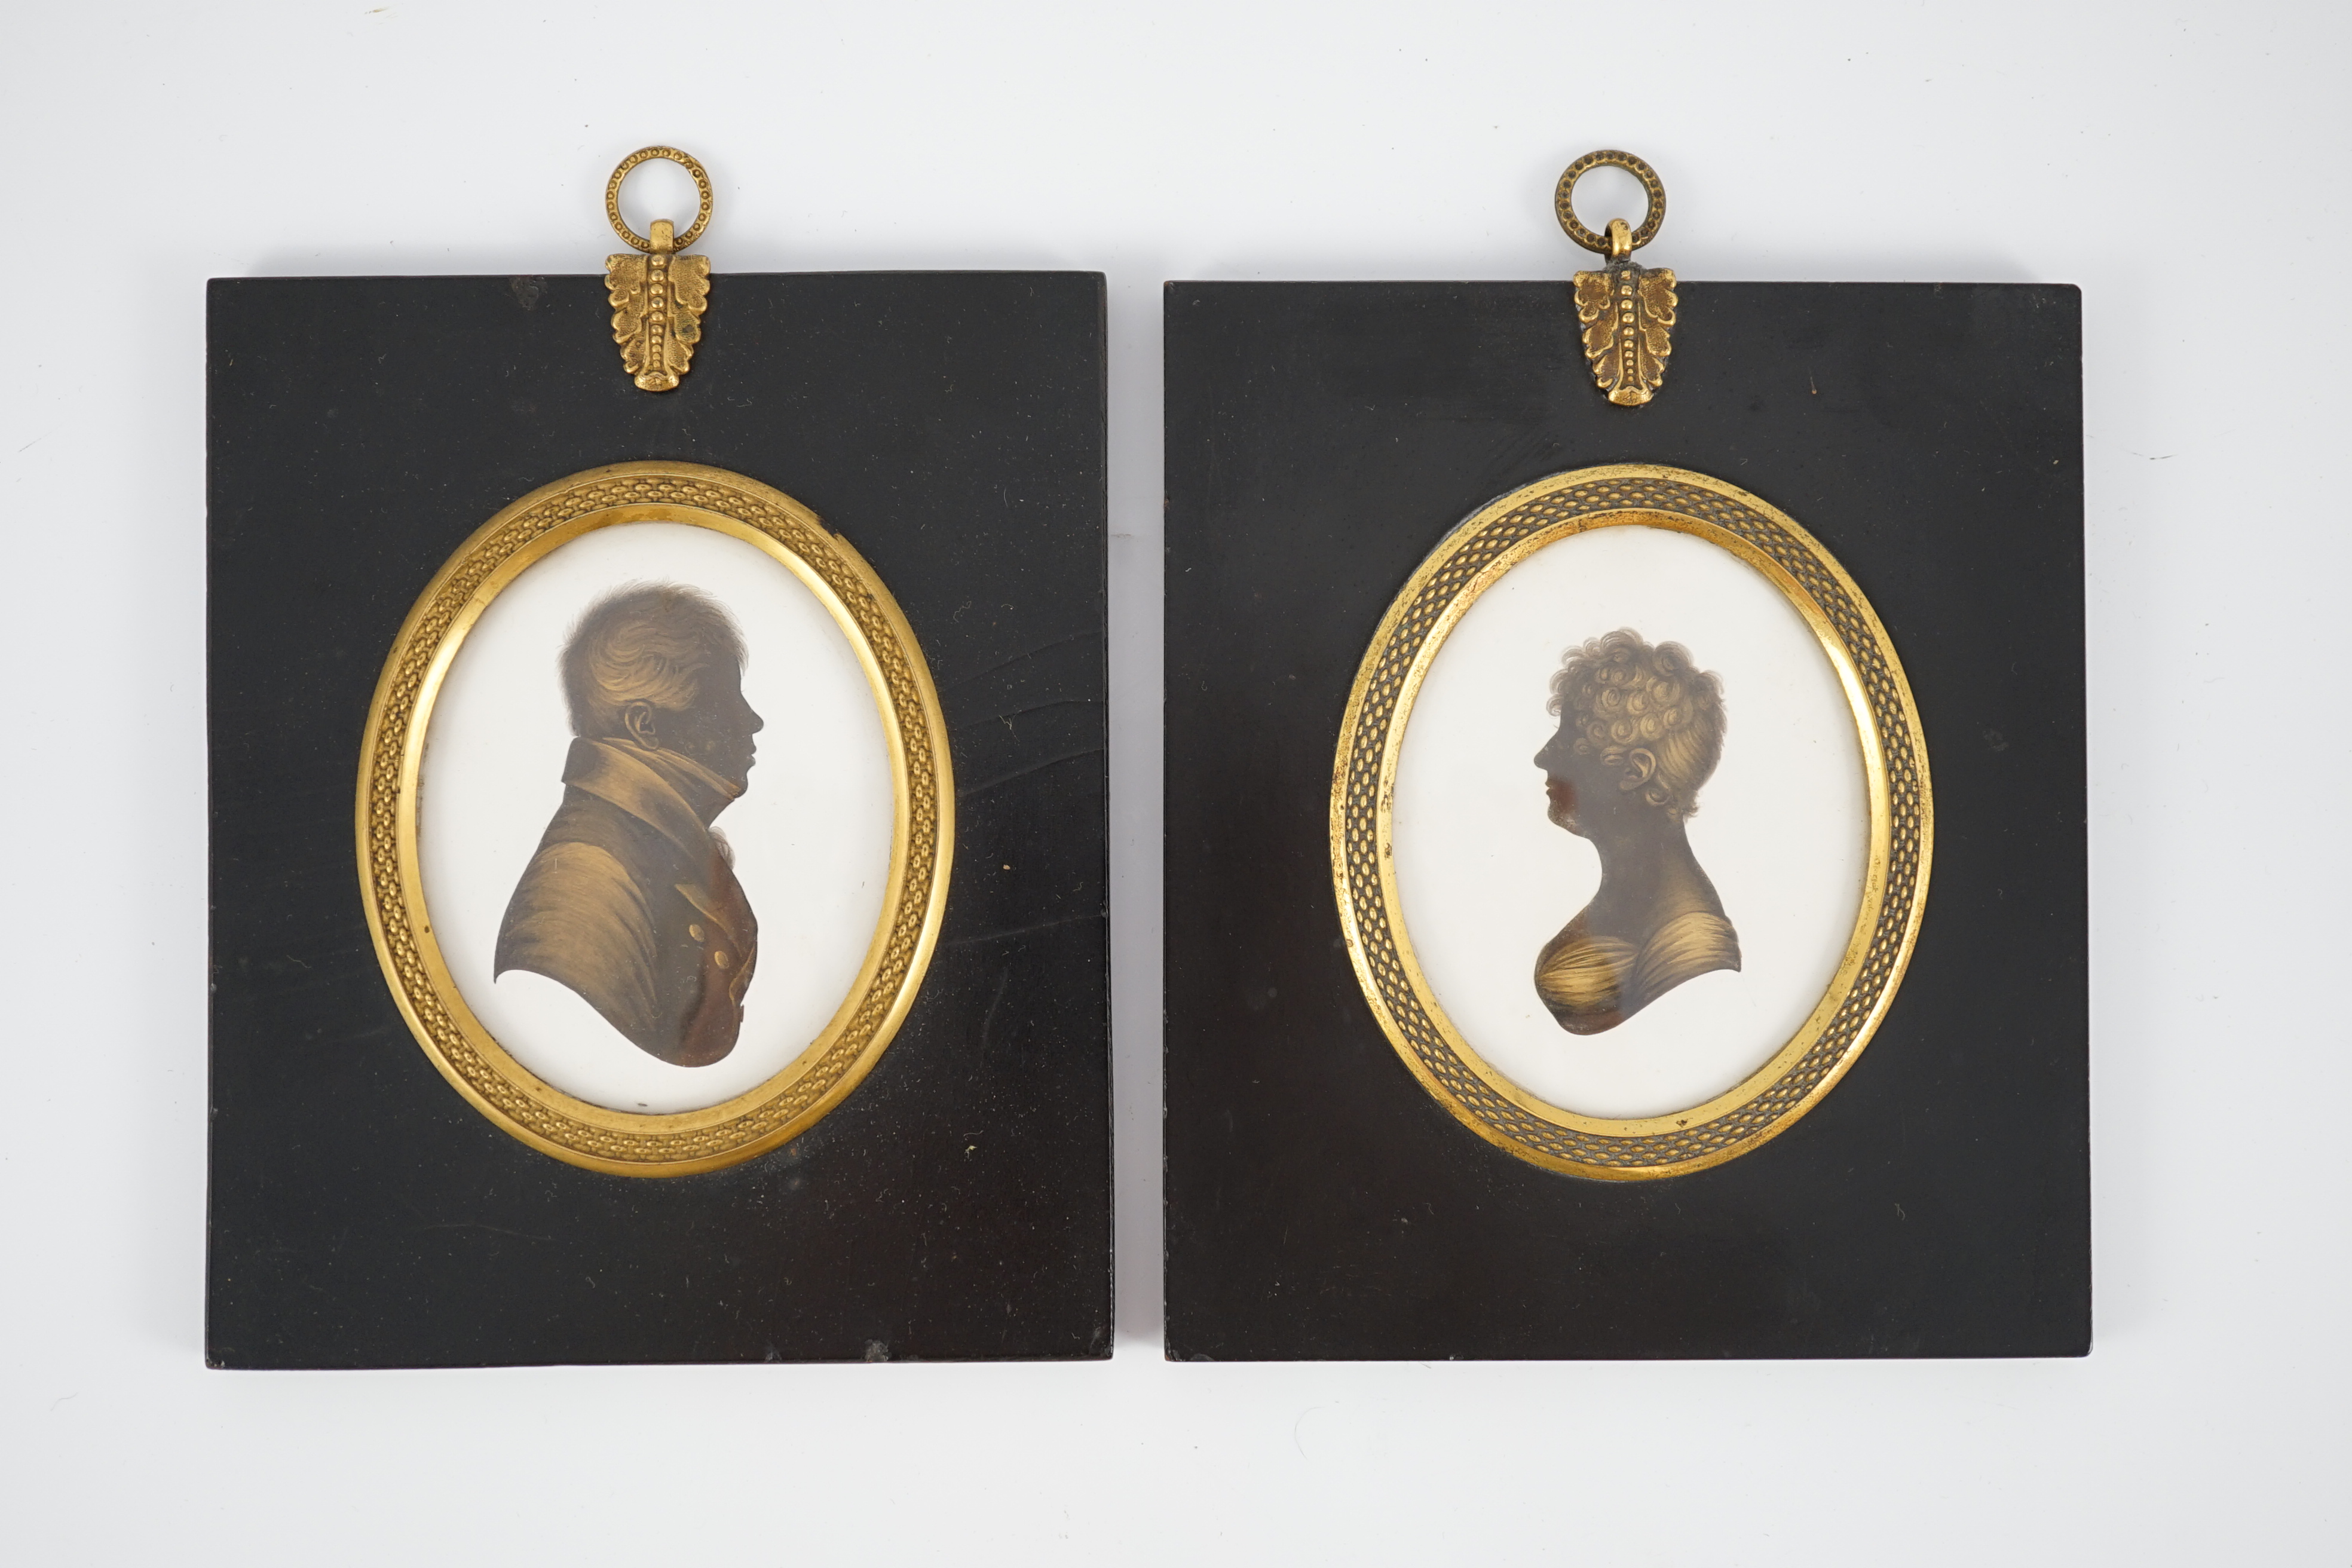 John Miers (1756-1821) and John Field (1772-1848), Silhouettes of a lady and gentleman, painted and bronzed plaster (a pair), 8 x 6.5cm.